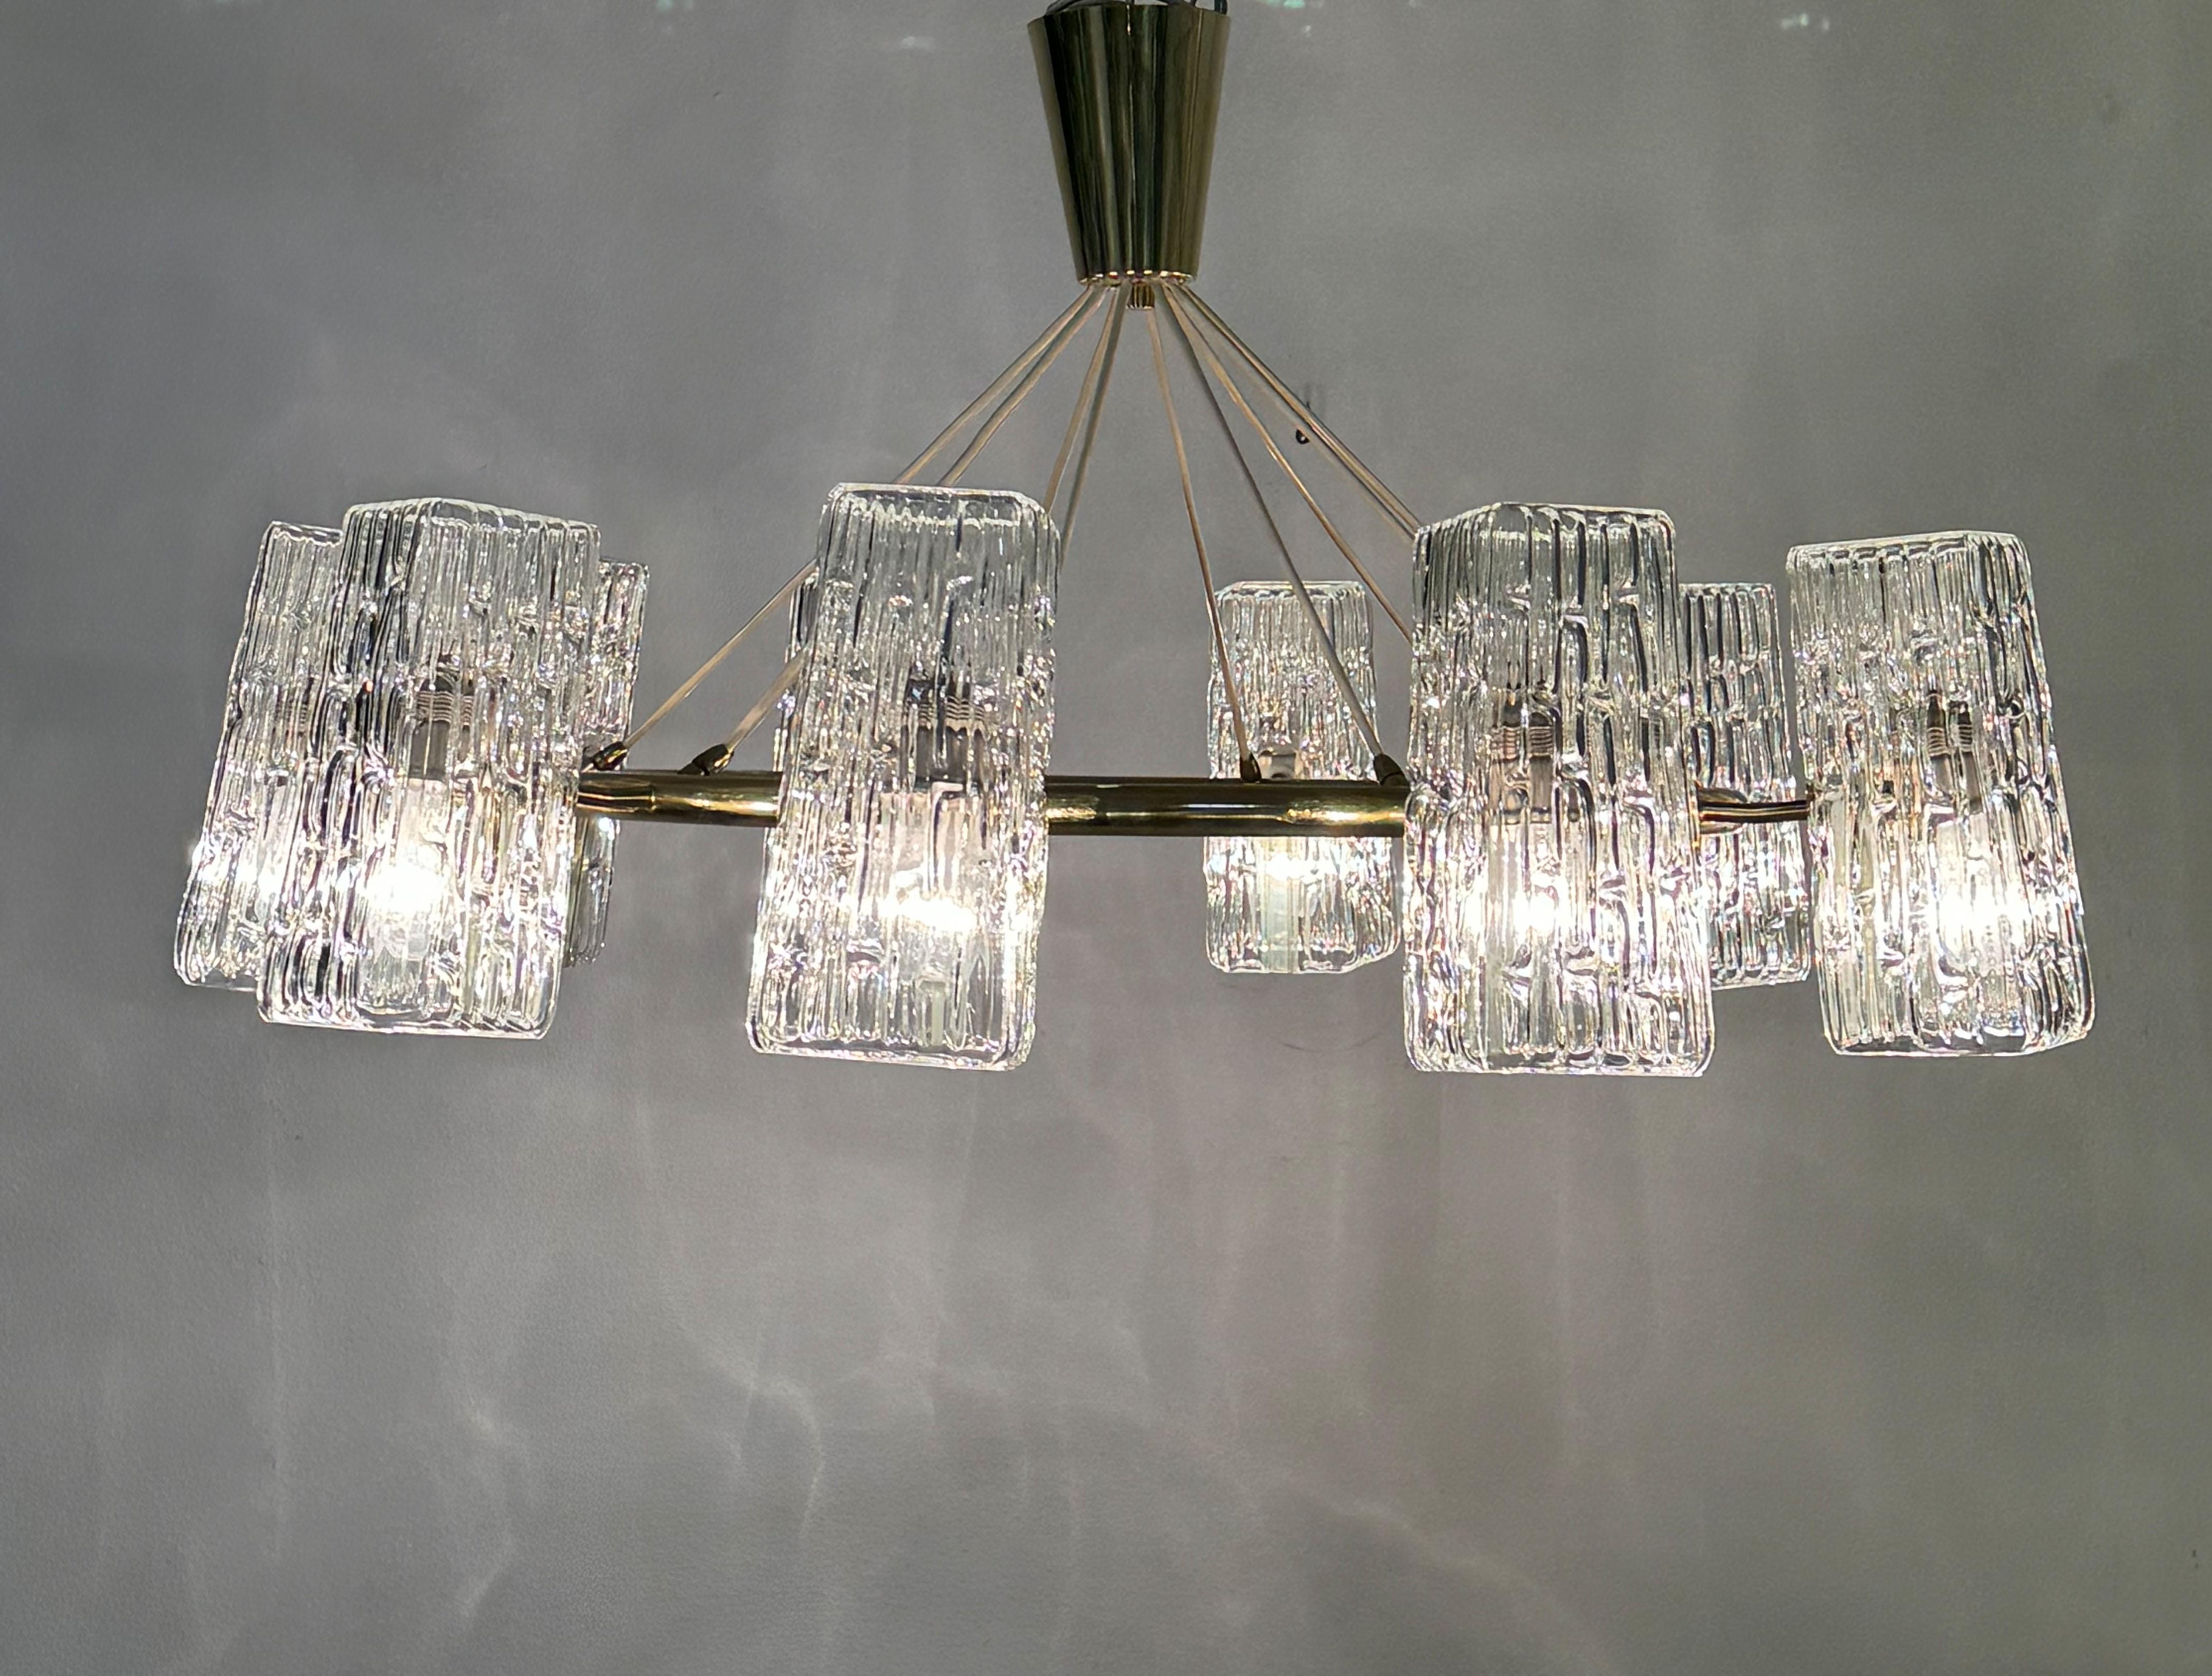 Huge Midcentury Brass Chandelier With Pressed Glass Shades By Rupert Nikoll For Sale 2